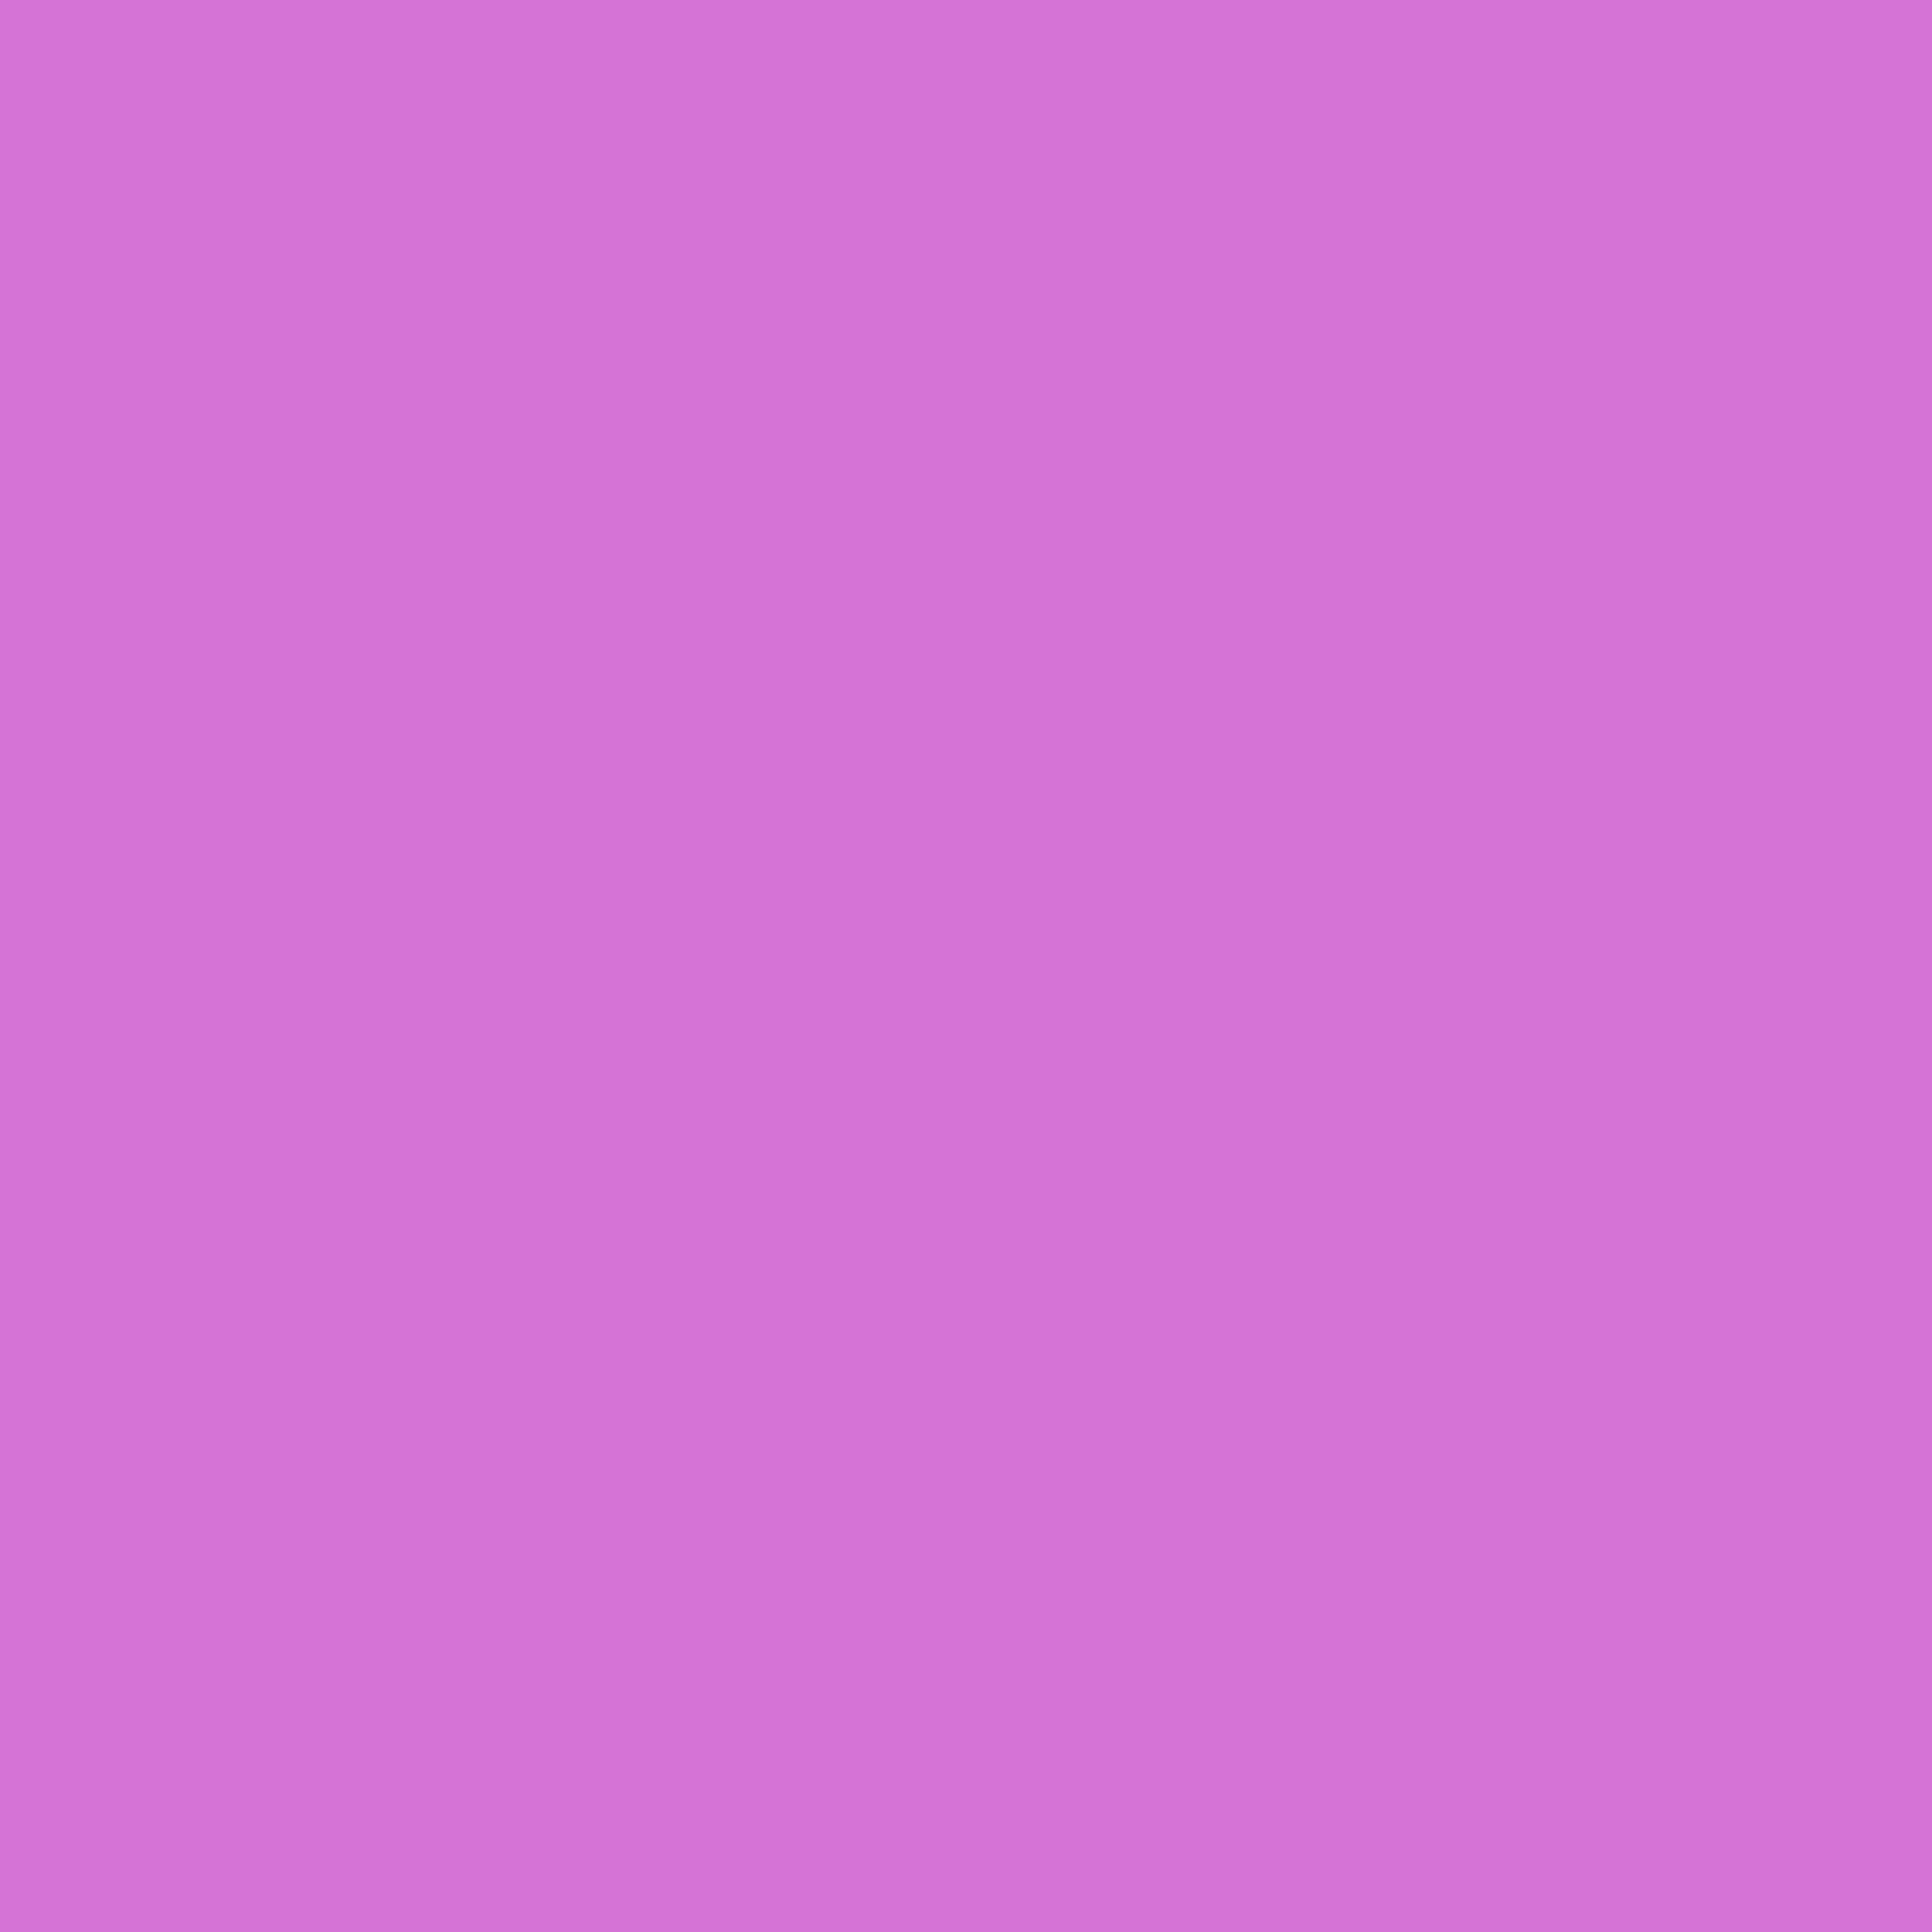 2732x2732 French Mauve Solid Color Background